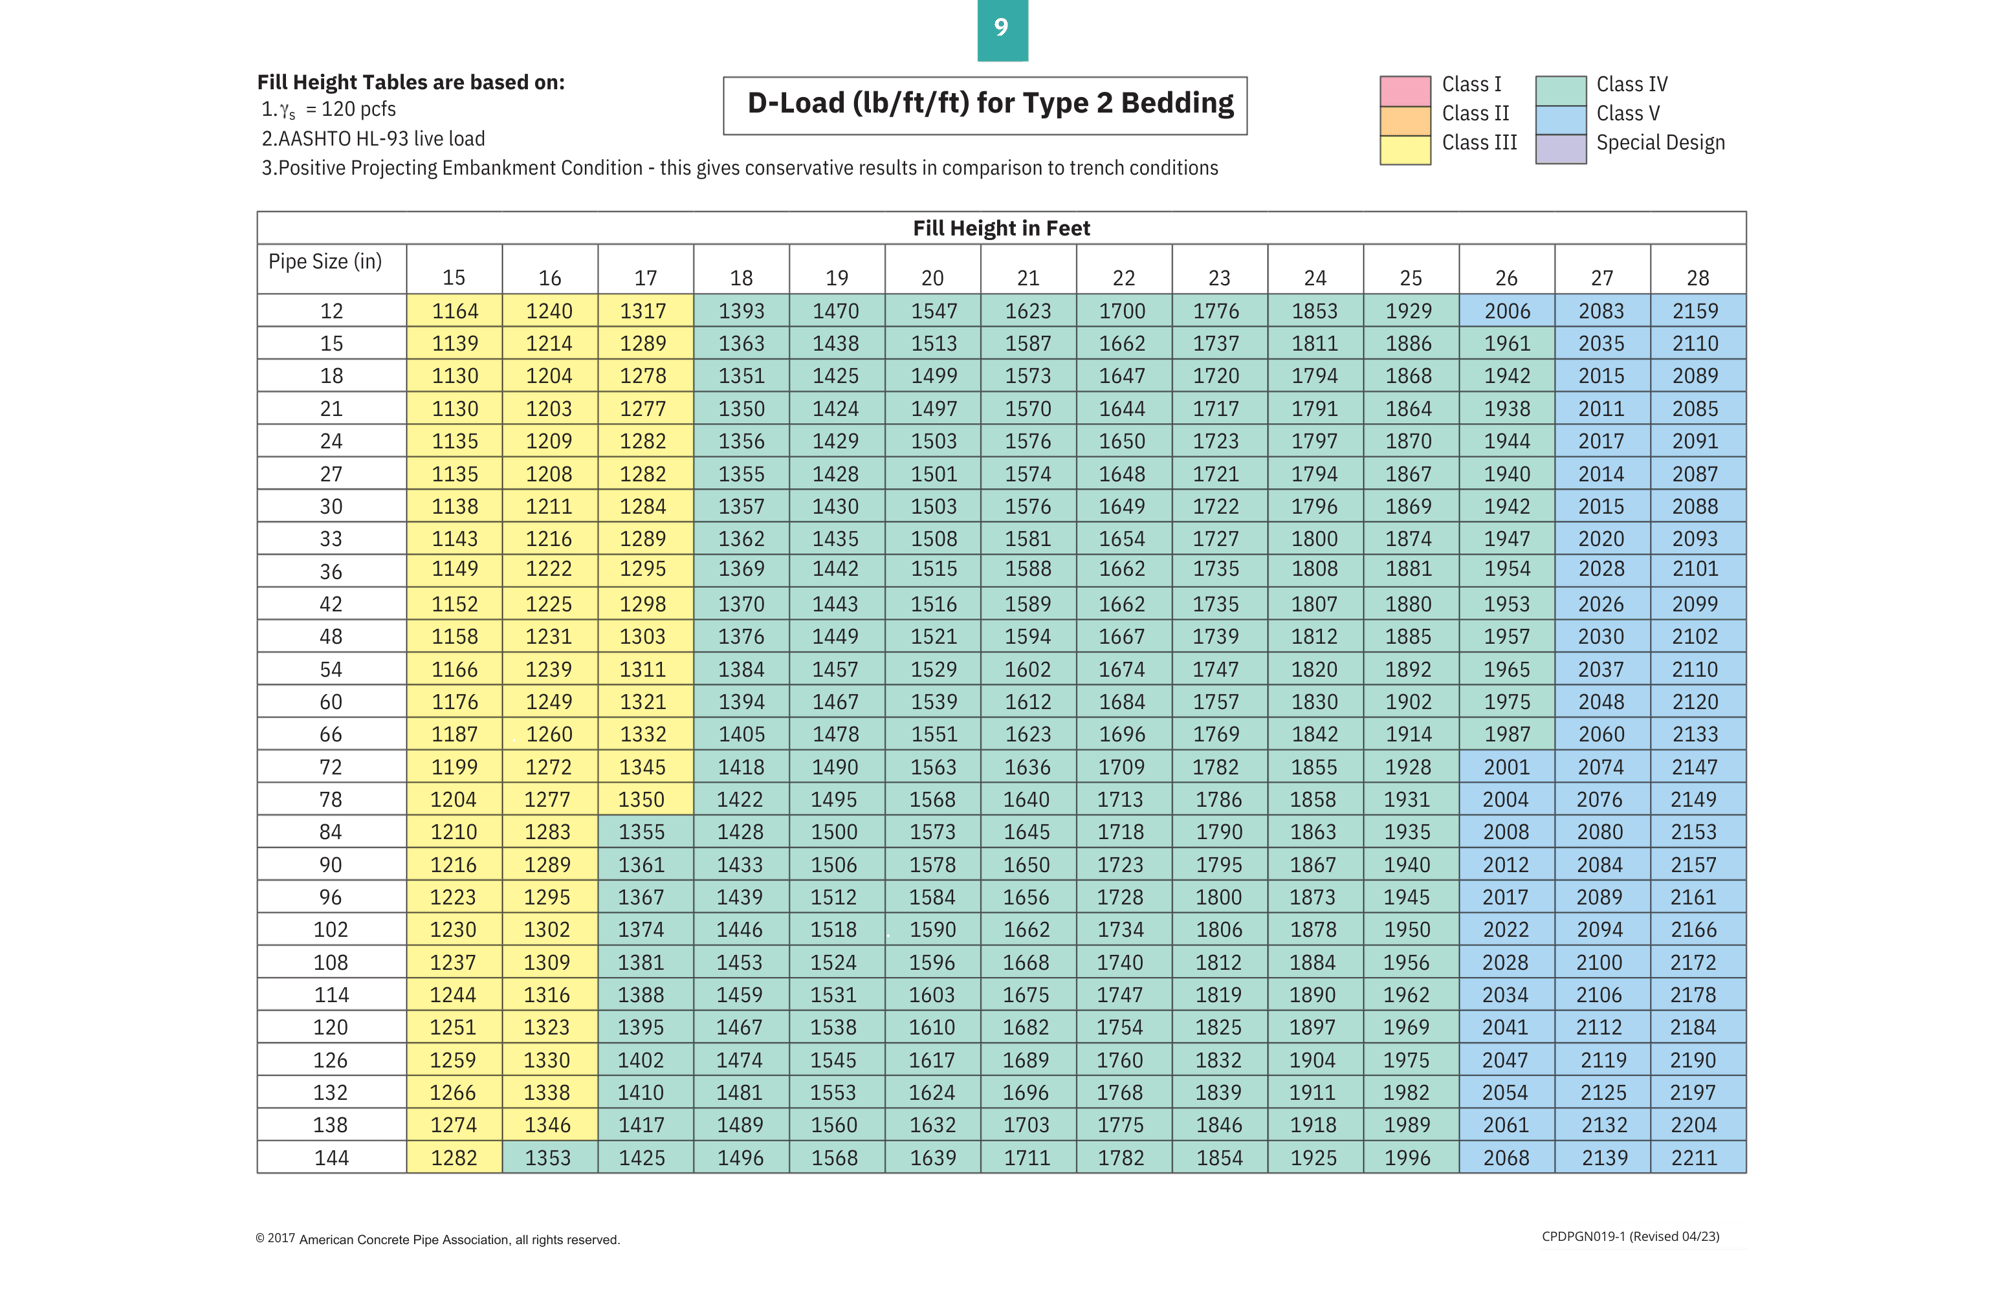 Fill Height Table-Page 9